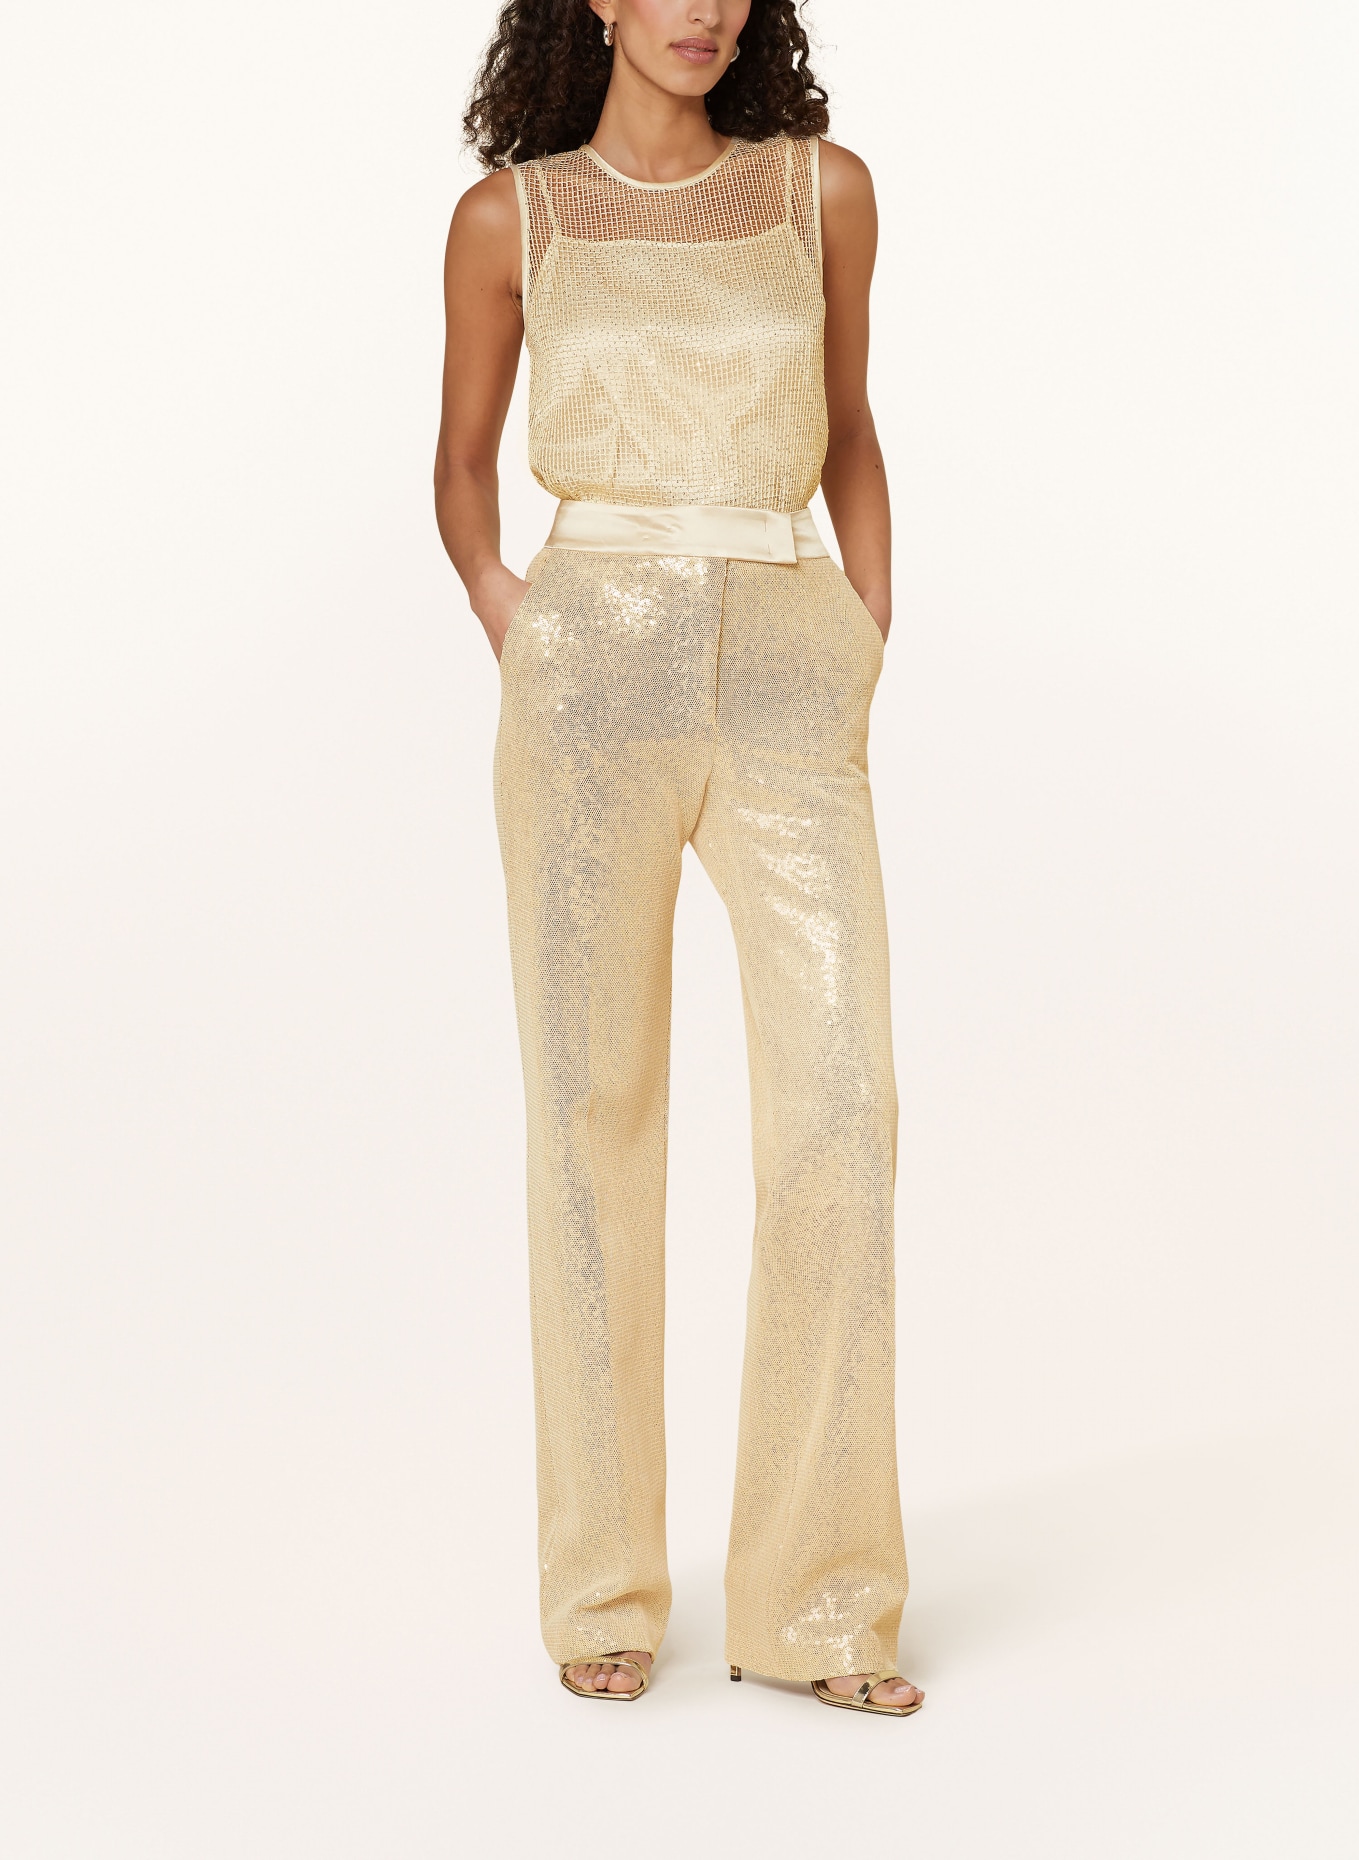 PESERICO Silk top with sequins, Color: BEIGE/ GOLD (Image 2)